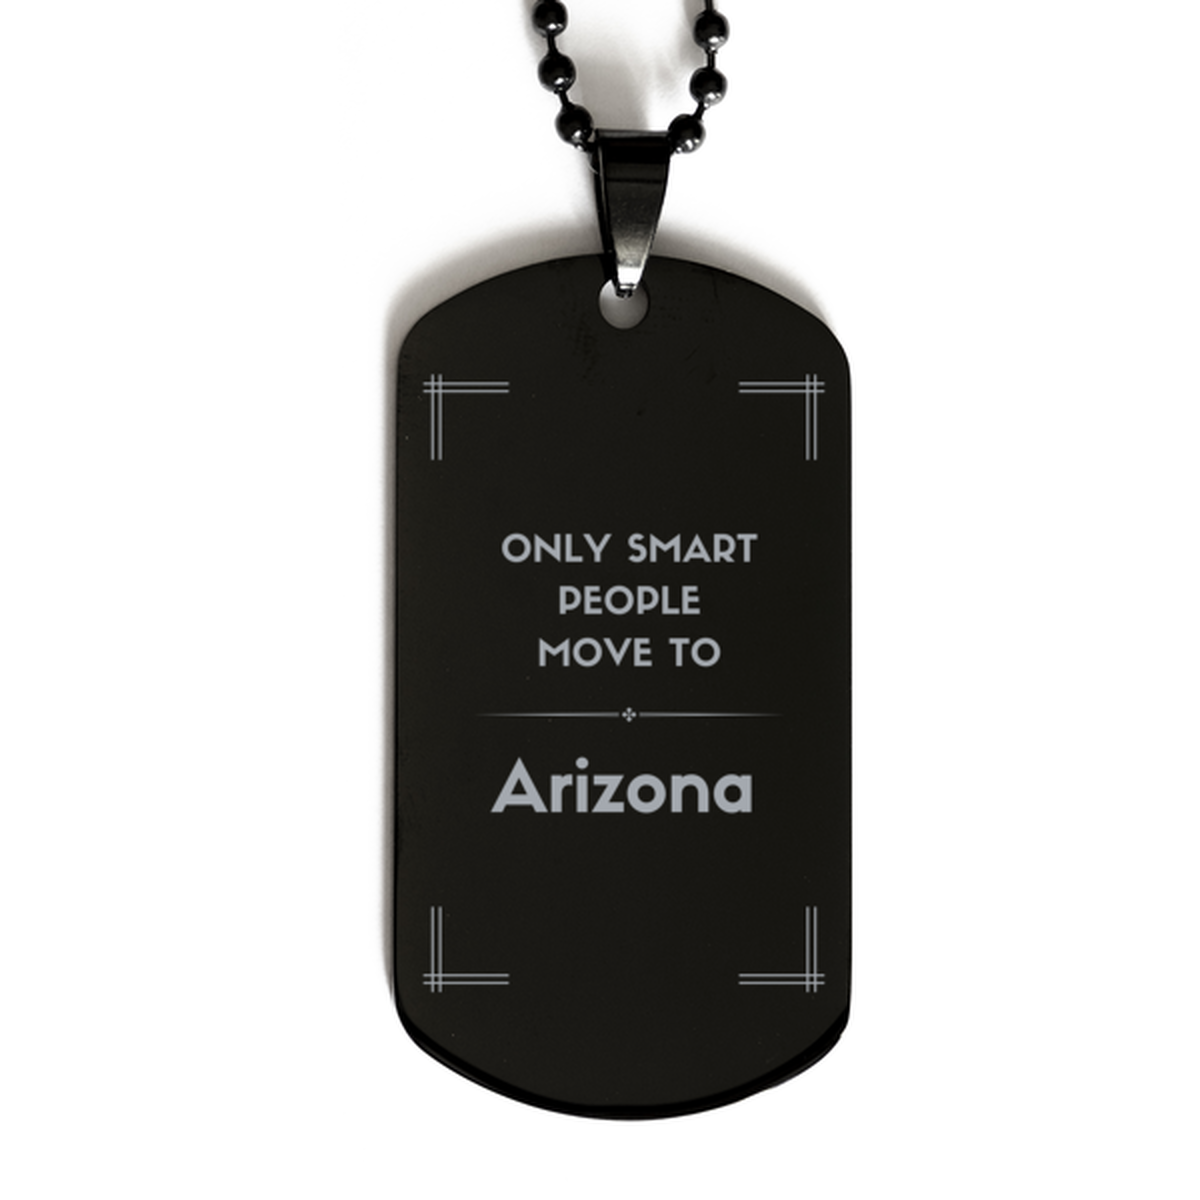 Only smart people move to Arizona Black Dog Tag, Gag Gifts For Arizona, Move to Arizona Gifts for Friends Coworker Funny Saying Quote